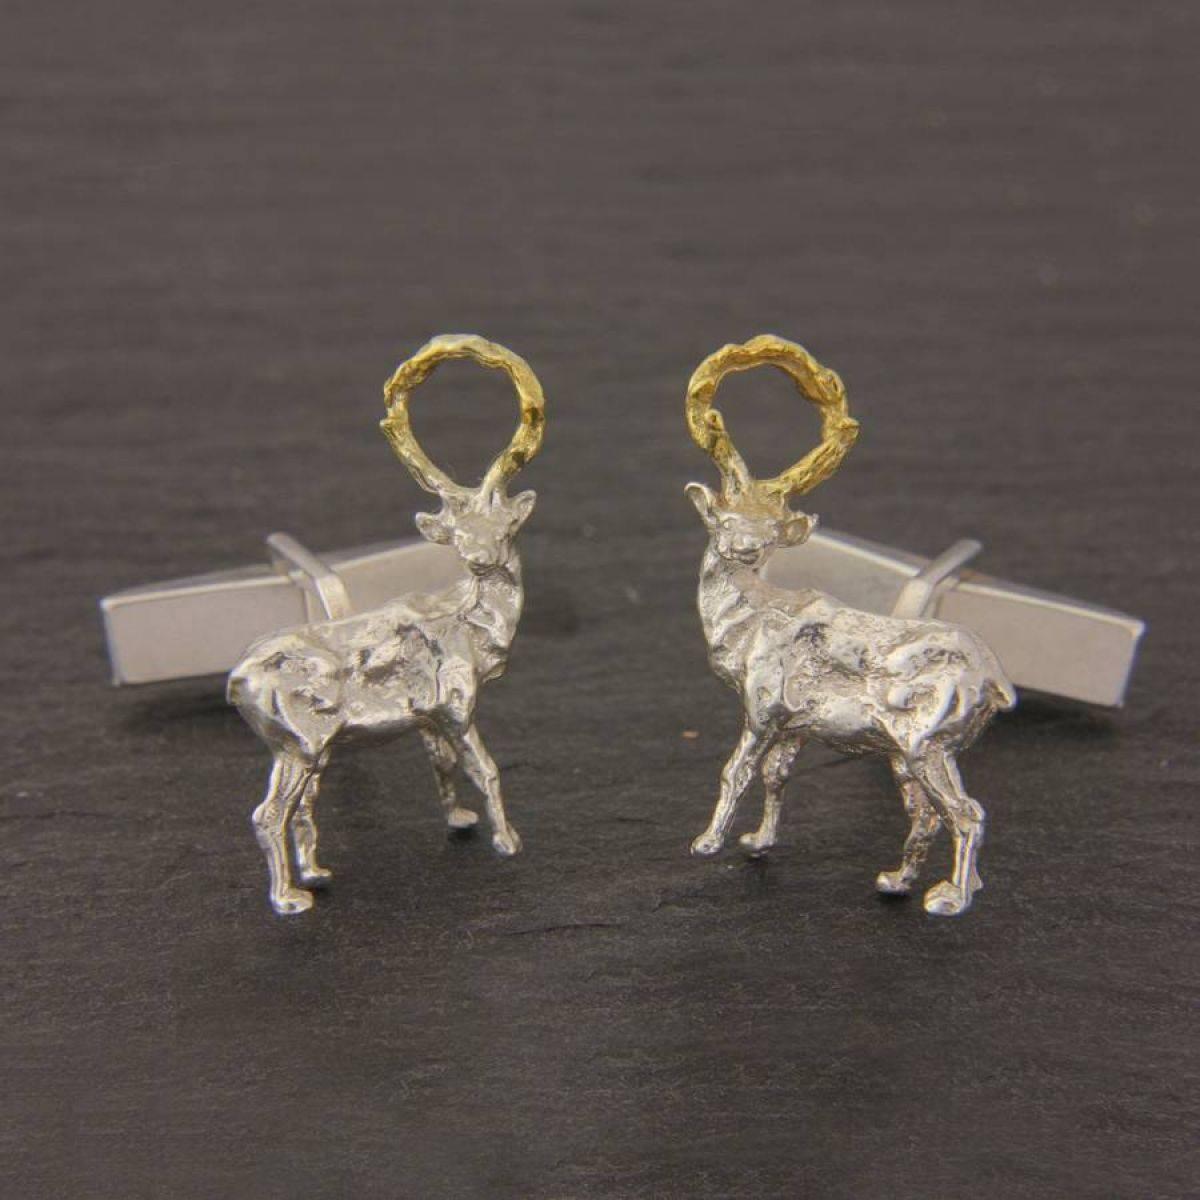 A pair of majestic Stags, originally sculpted and turned into unique castings.
Simon carefully uses 18k gold on the antlers to complete this stunning design.
Stand out from the crowd with these striking cufflinks.